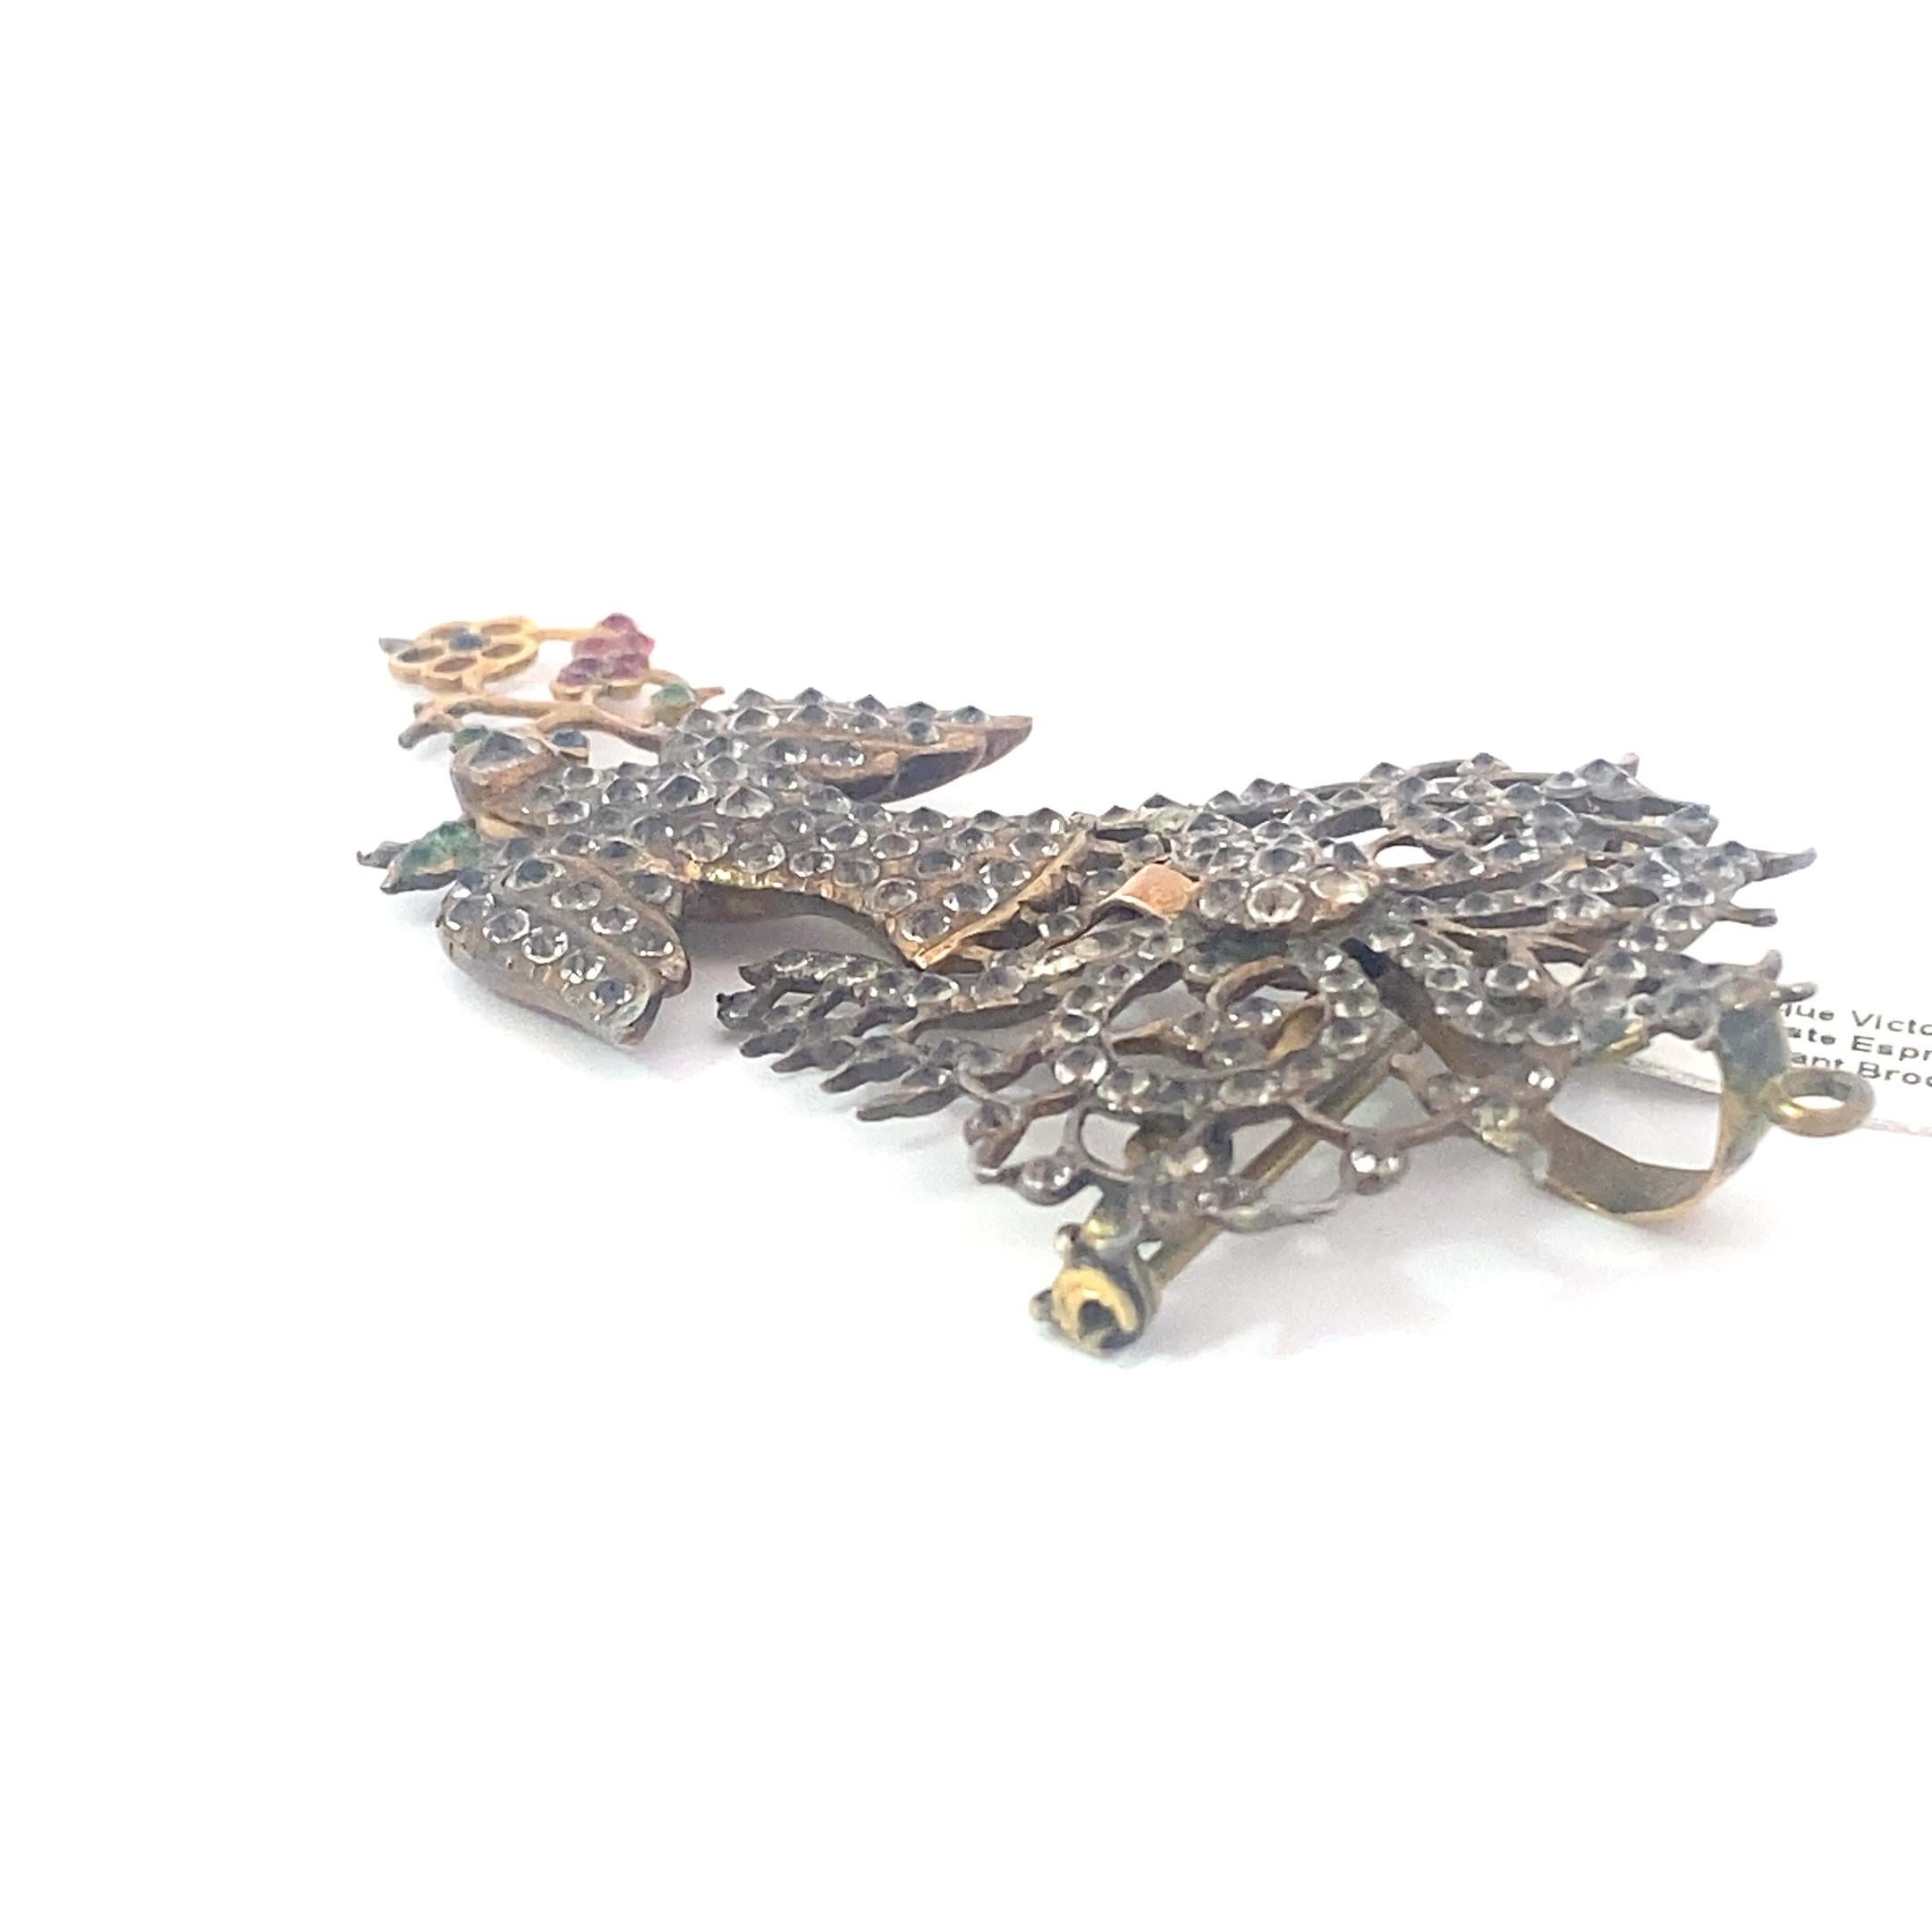 Deliciously Large brooch from the Victorian era. This piece is a full 3 inches of articulated splendor. Depicting a bird, this brooch features lovely past stone pave in a number of colors including clear, red, blue and green. This enormous piece